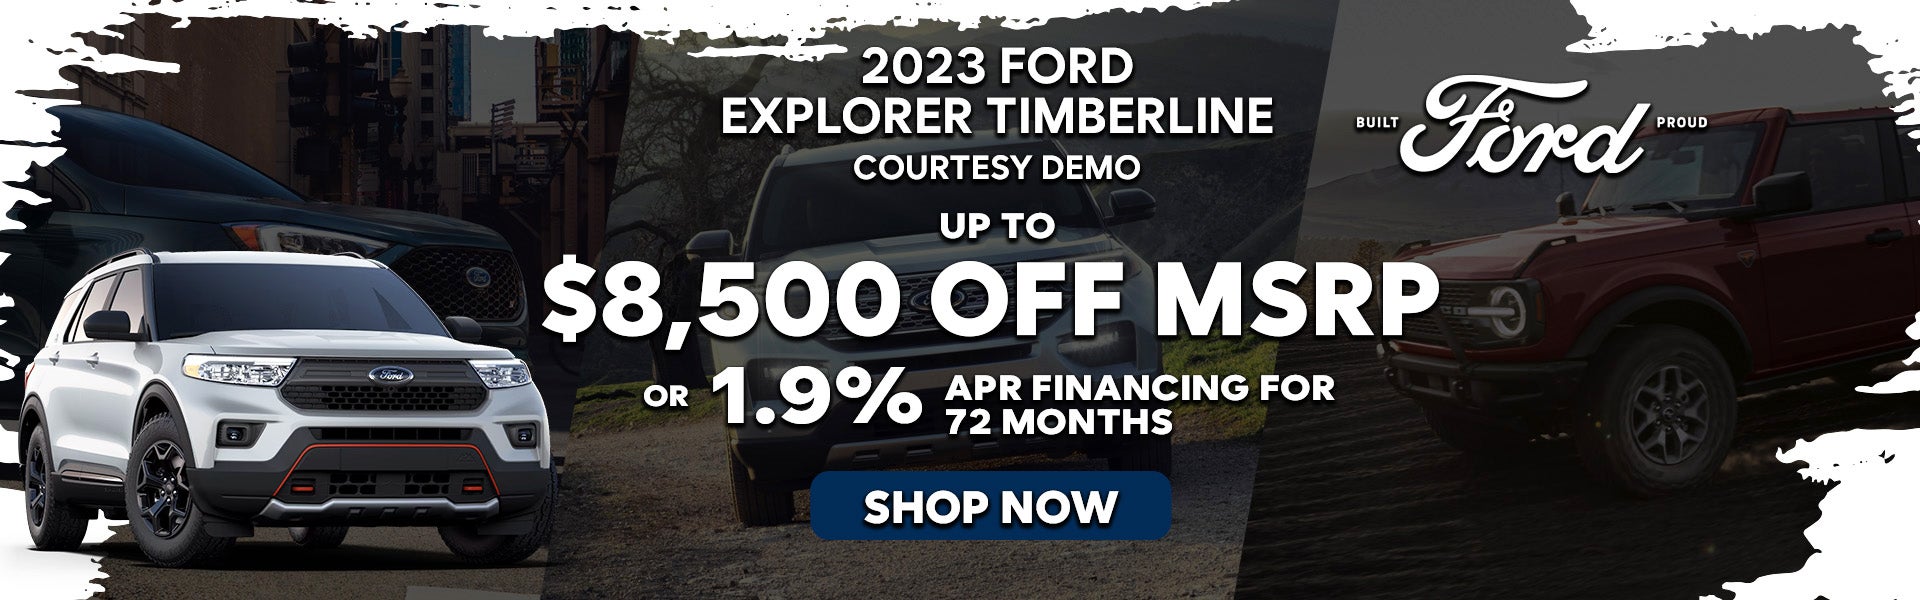 2023 Ford Explorer Timberline Special Offer